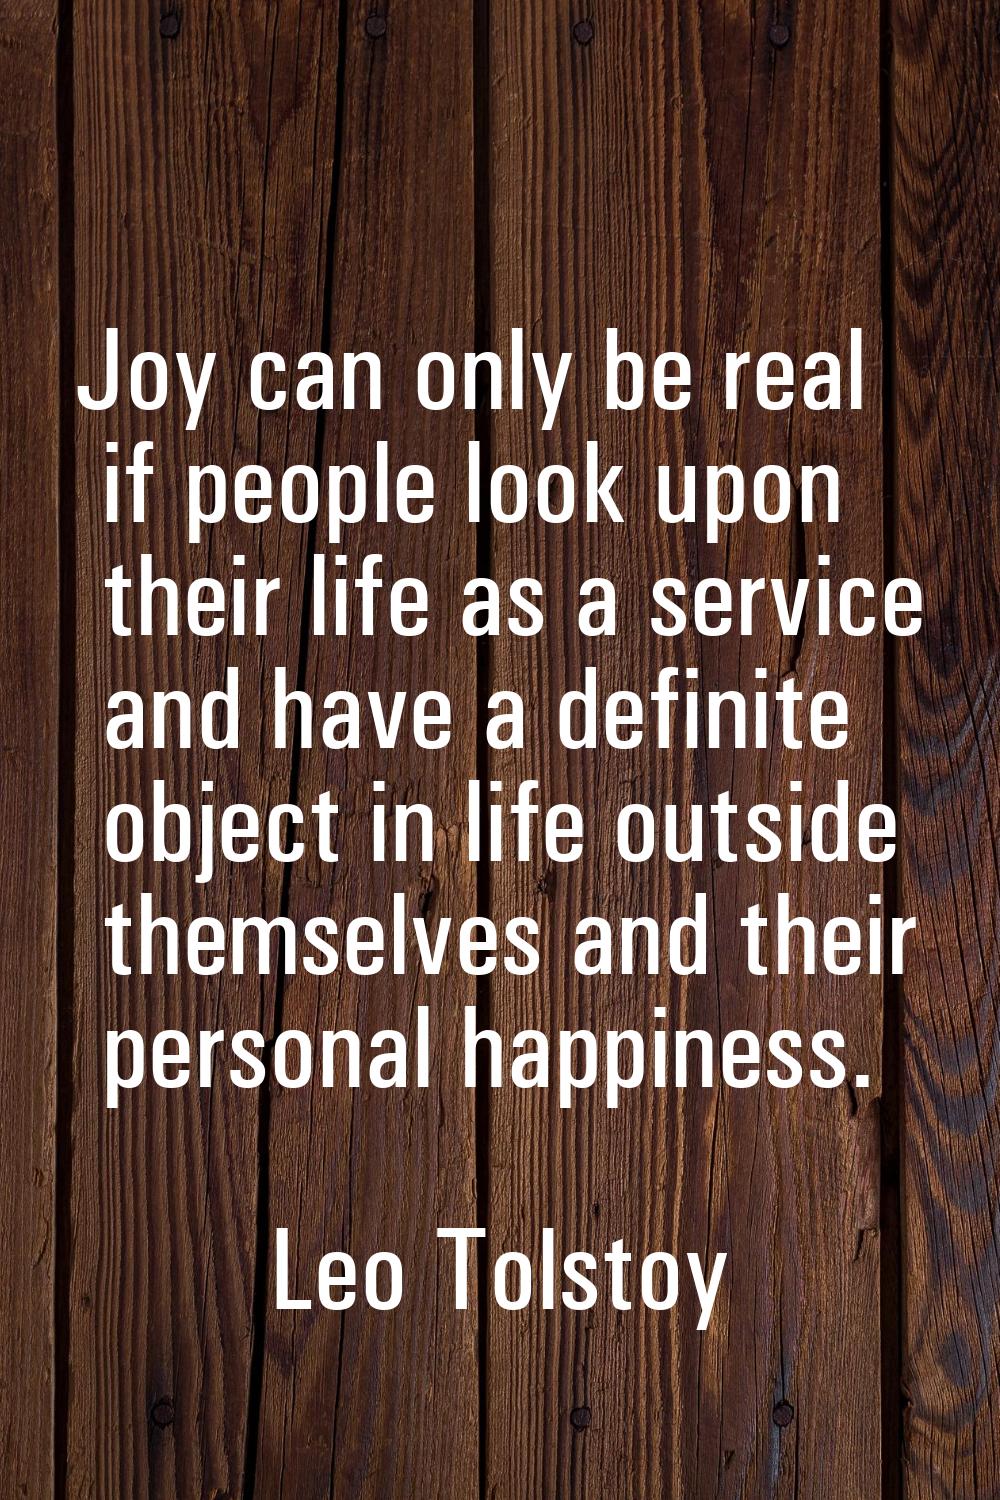 Joy can only be real if people look upon their life as a service and have a definite object in life